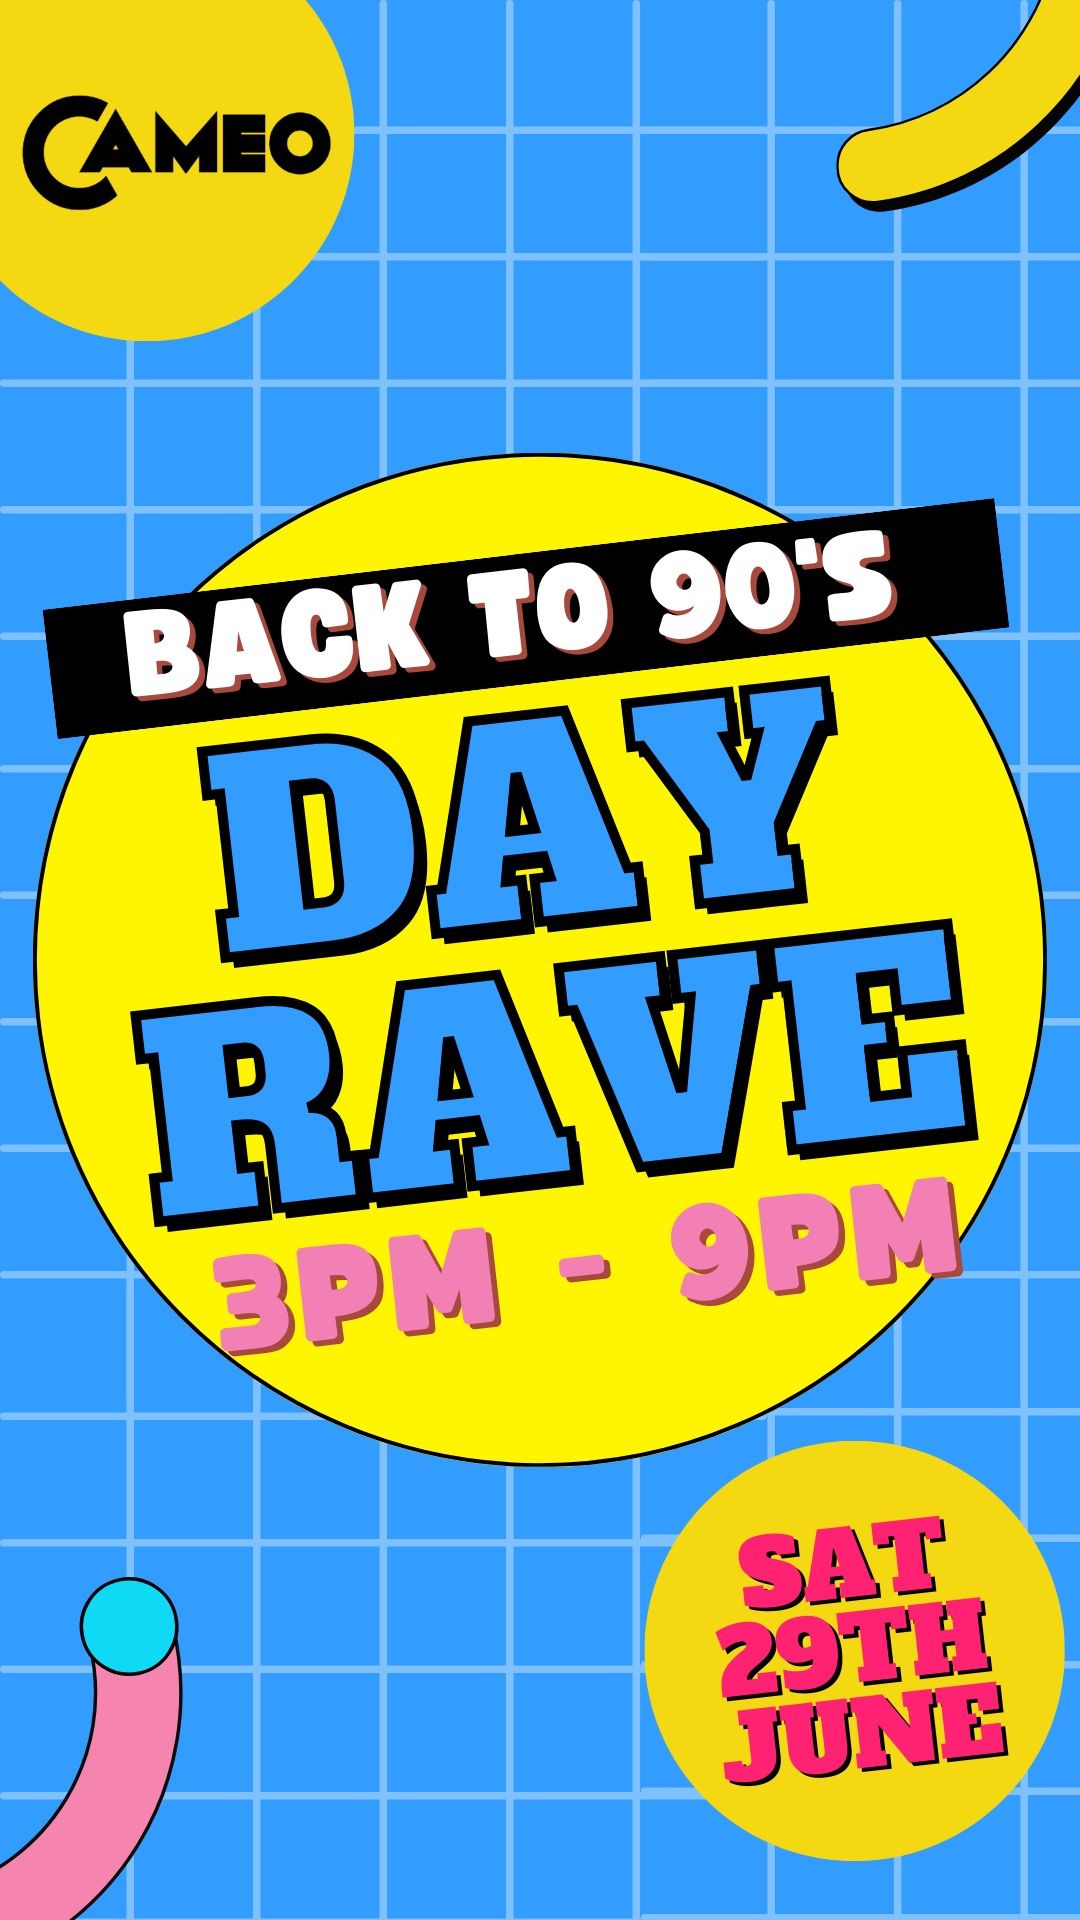 BACK TO THE 90\u2019s - DAY RAVE